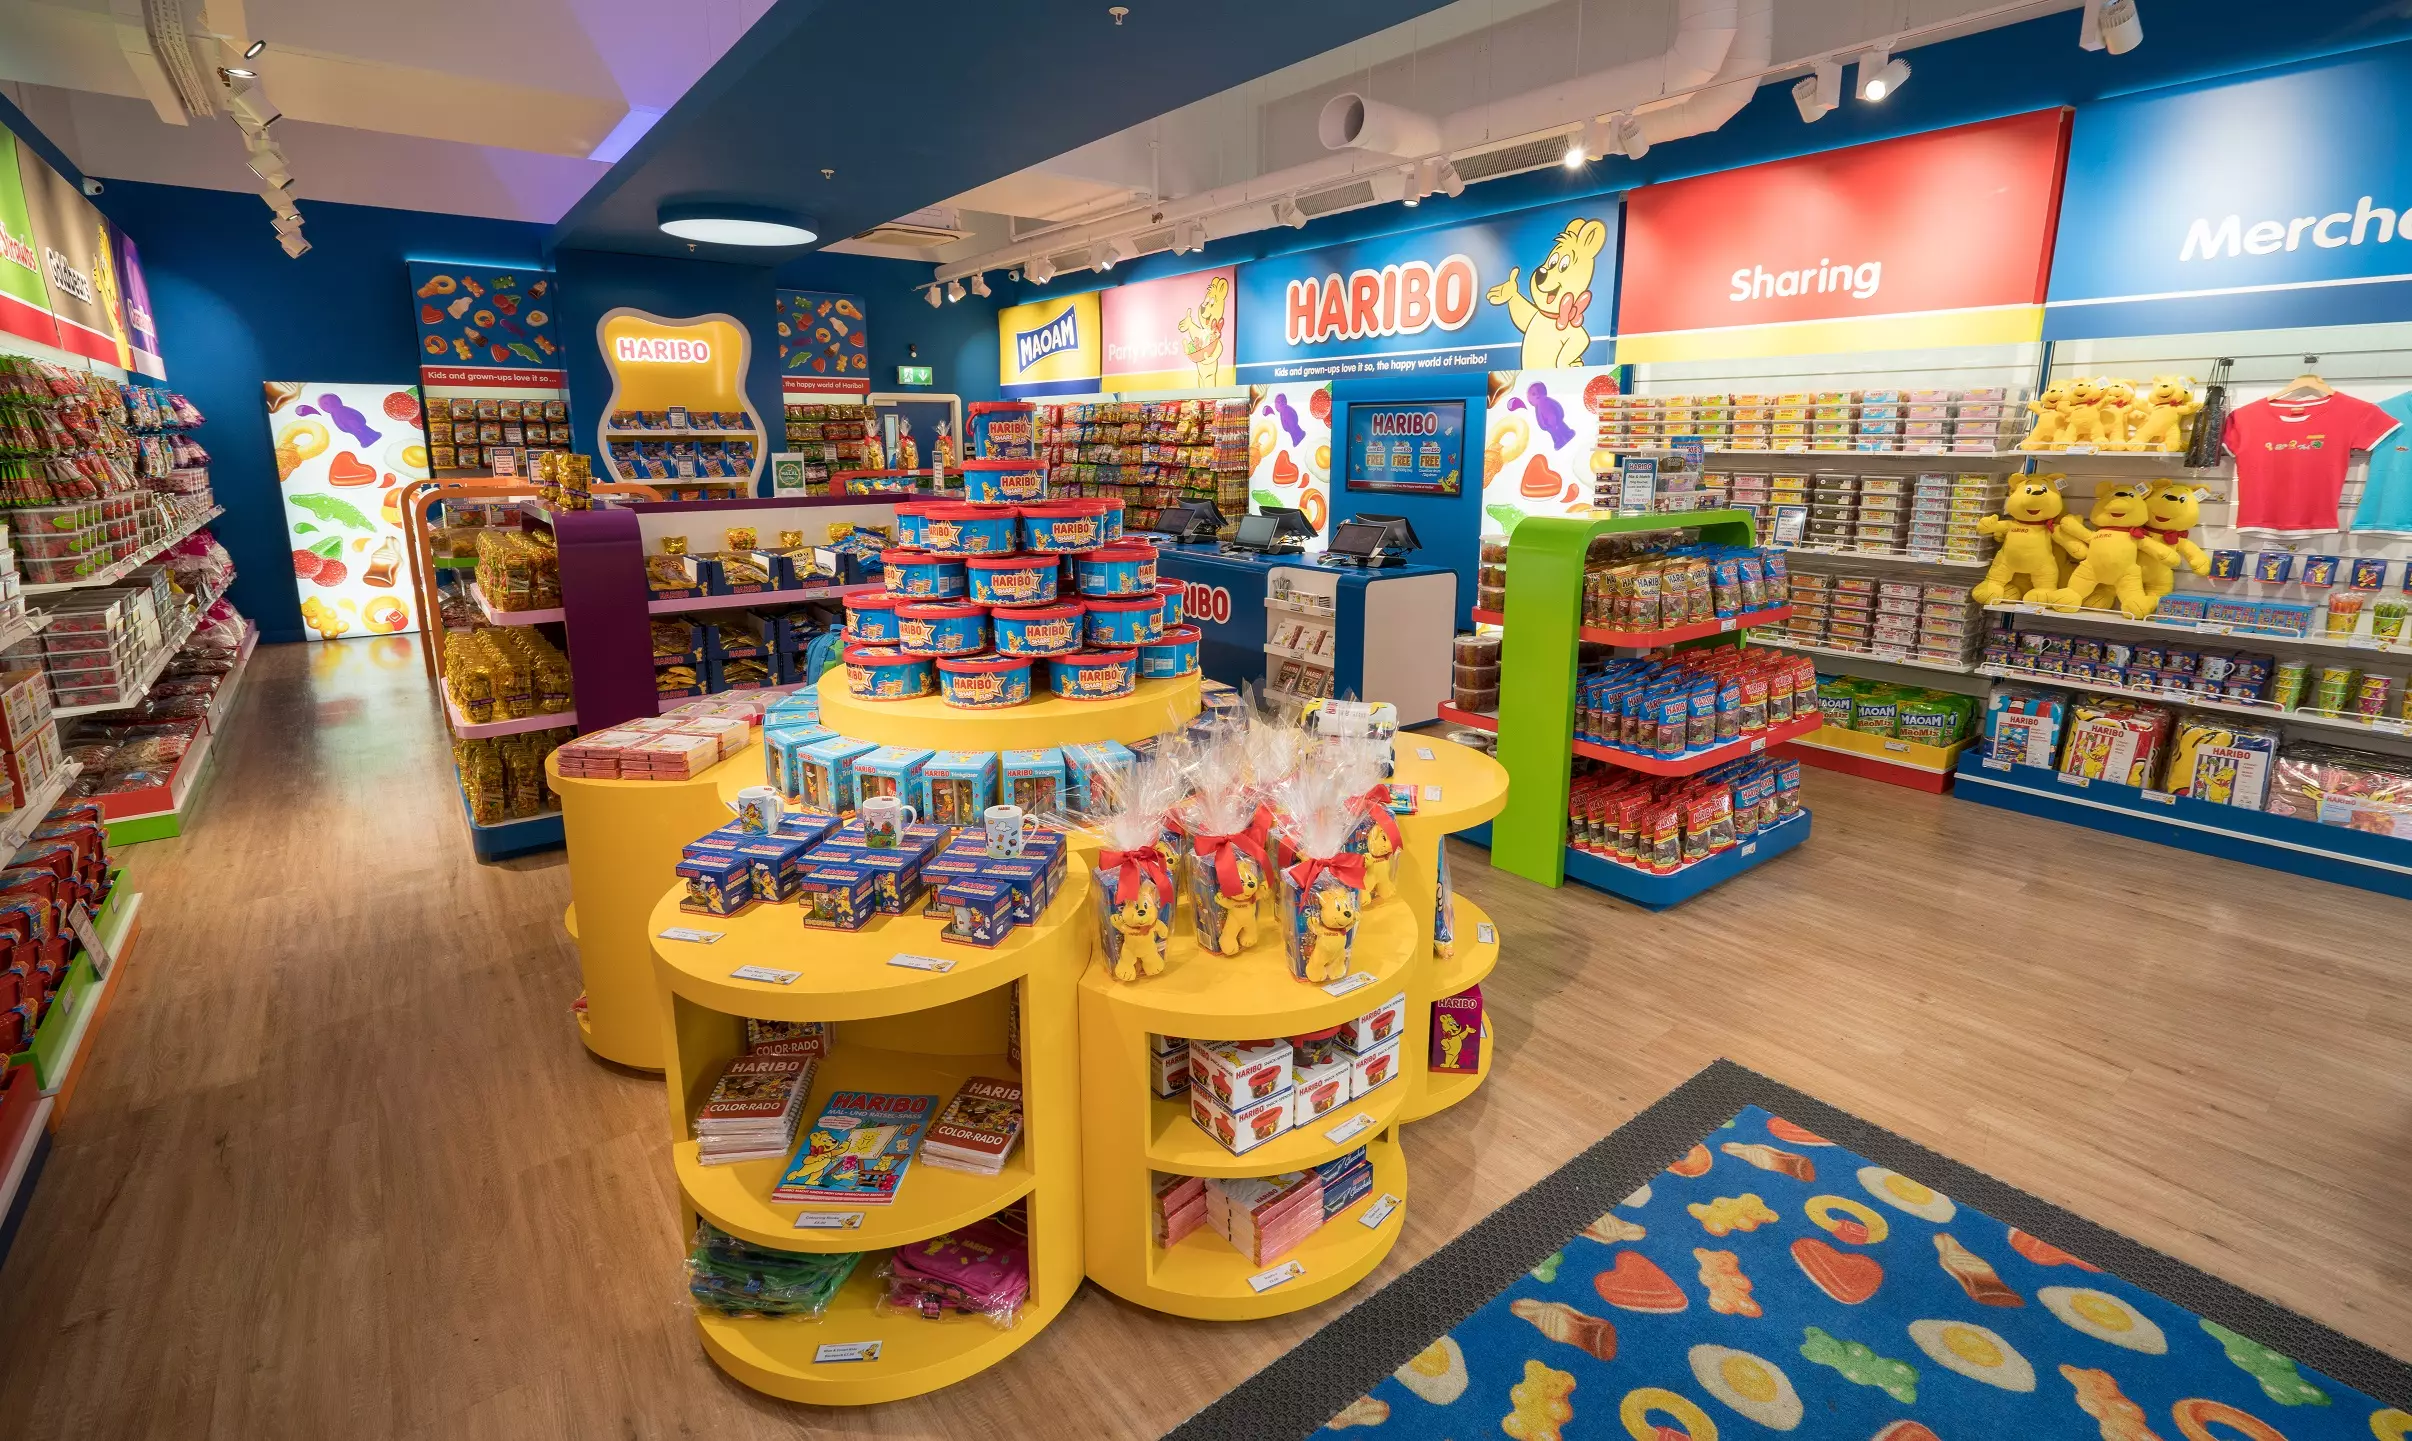 What the Haribo store will look like.